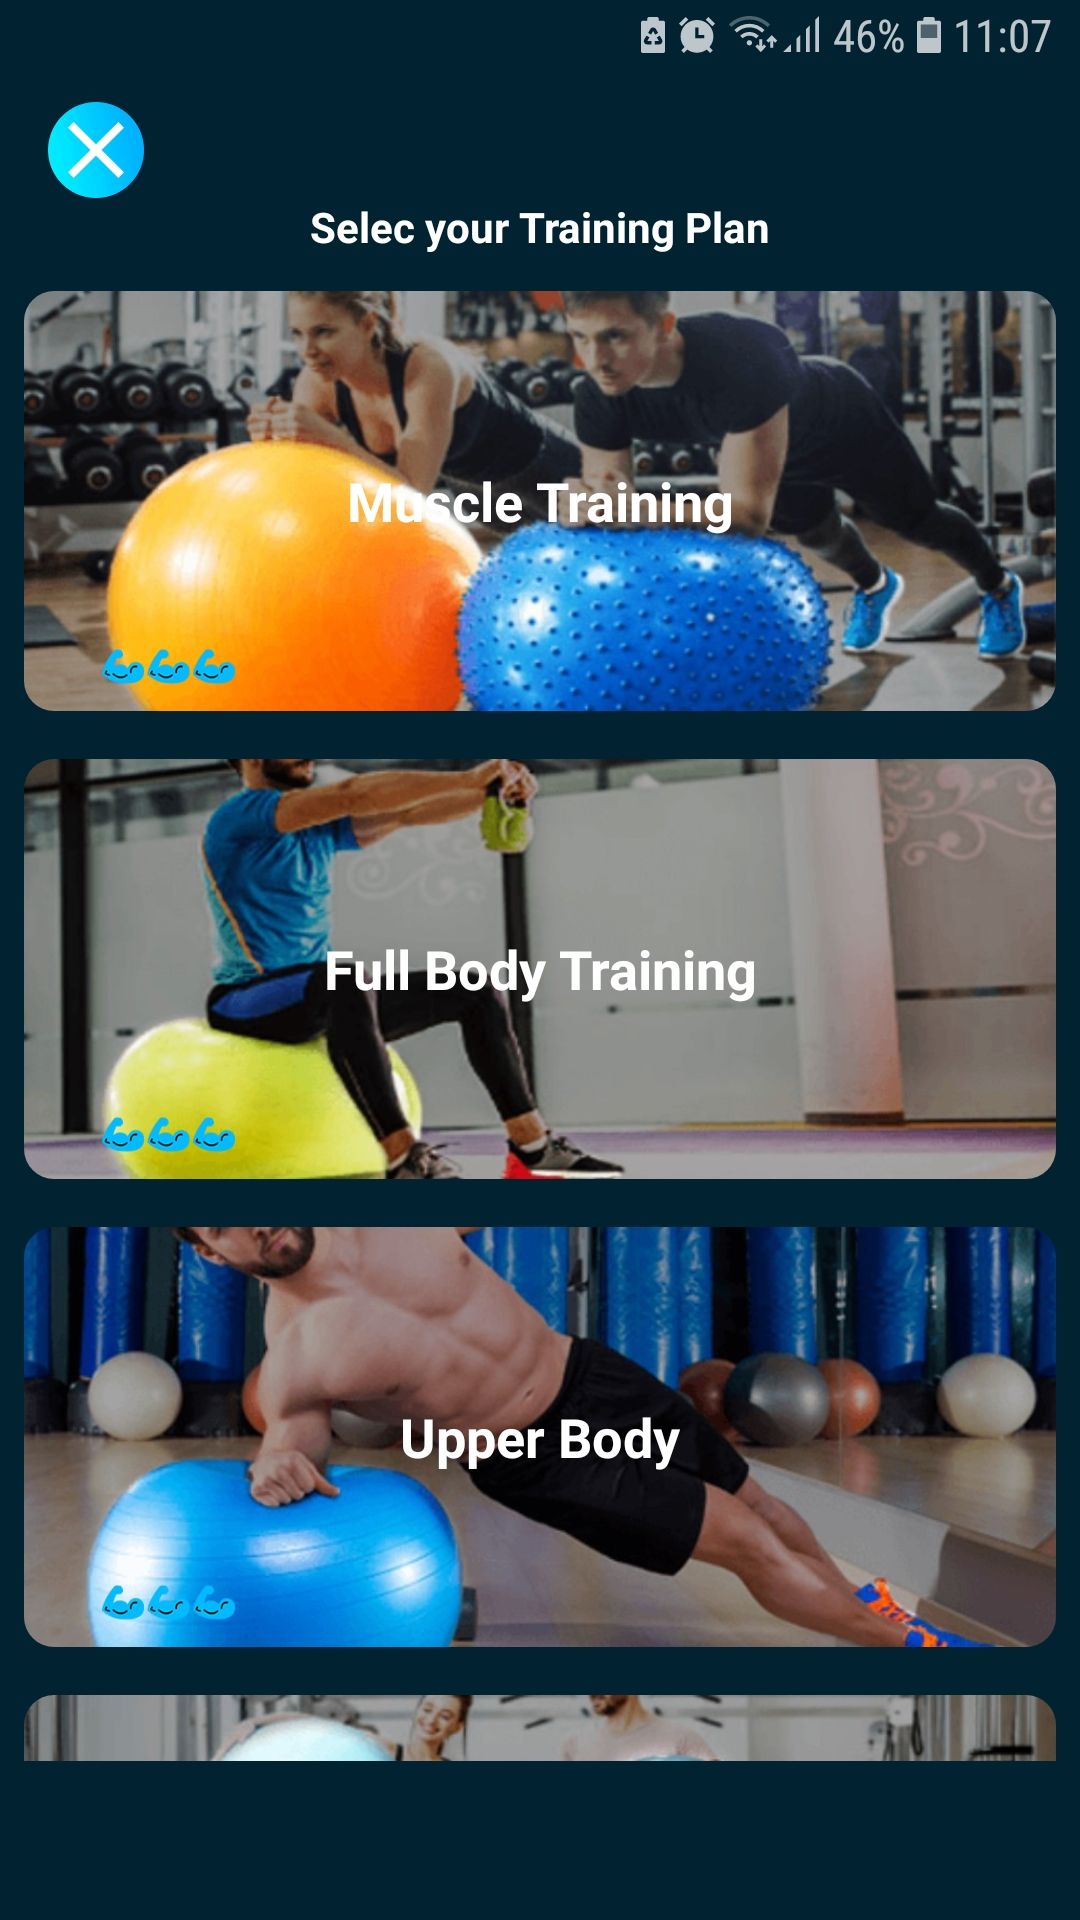 Swiss Ball Workouts mobile fitness app training